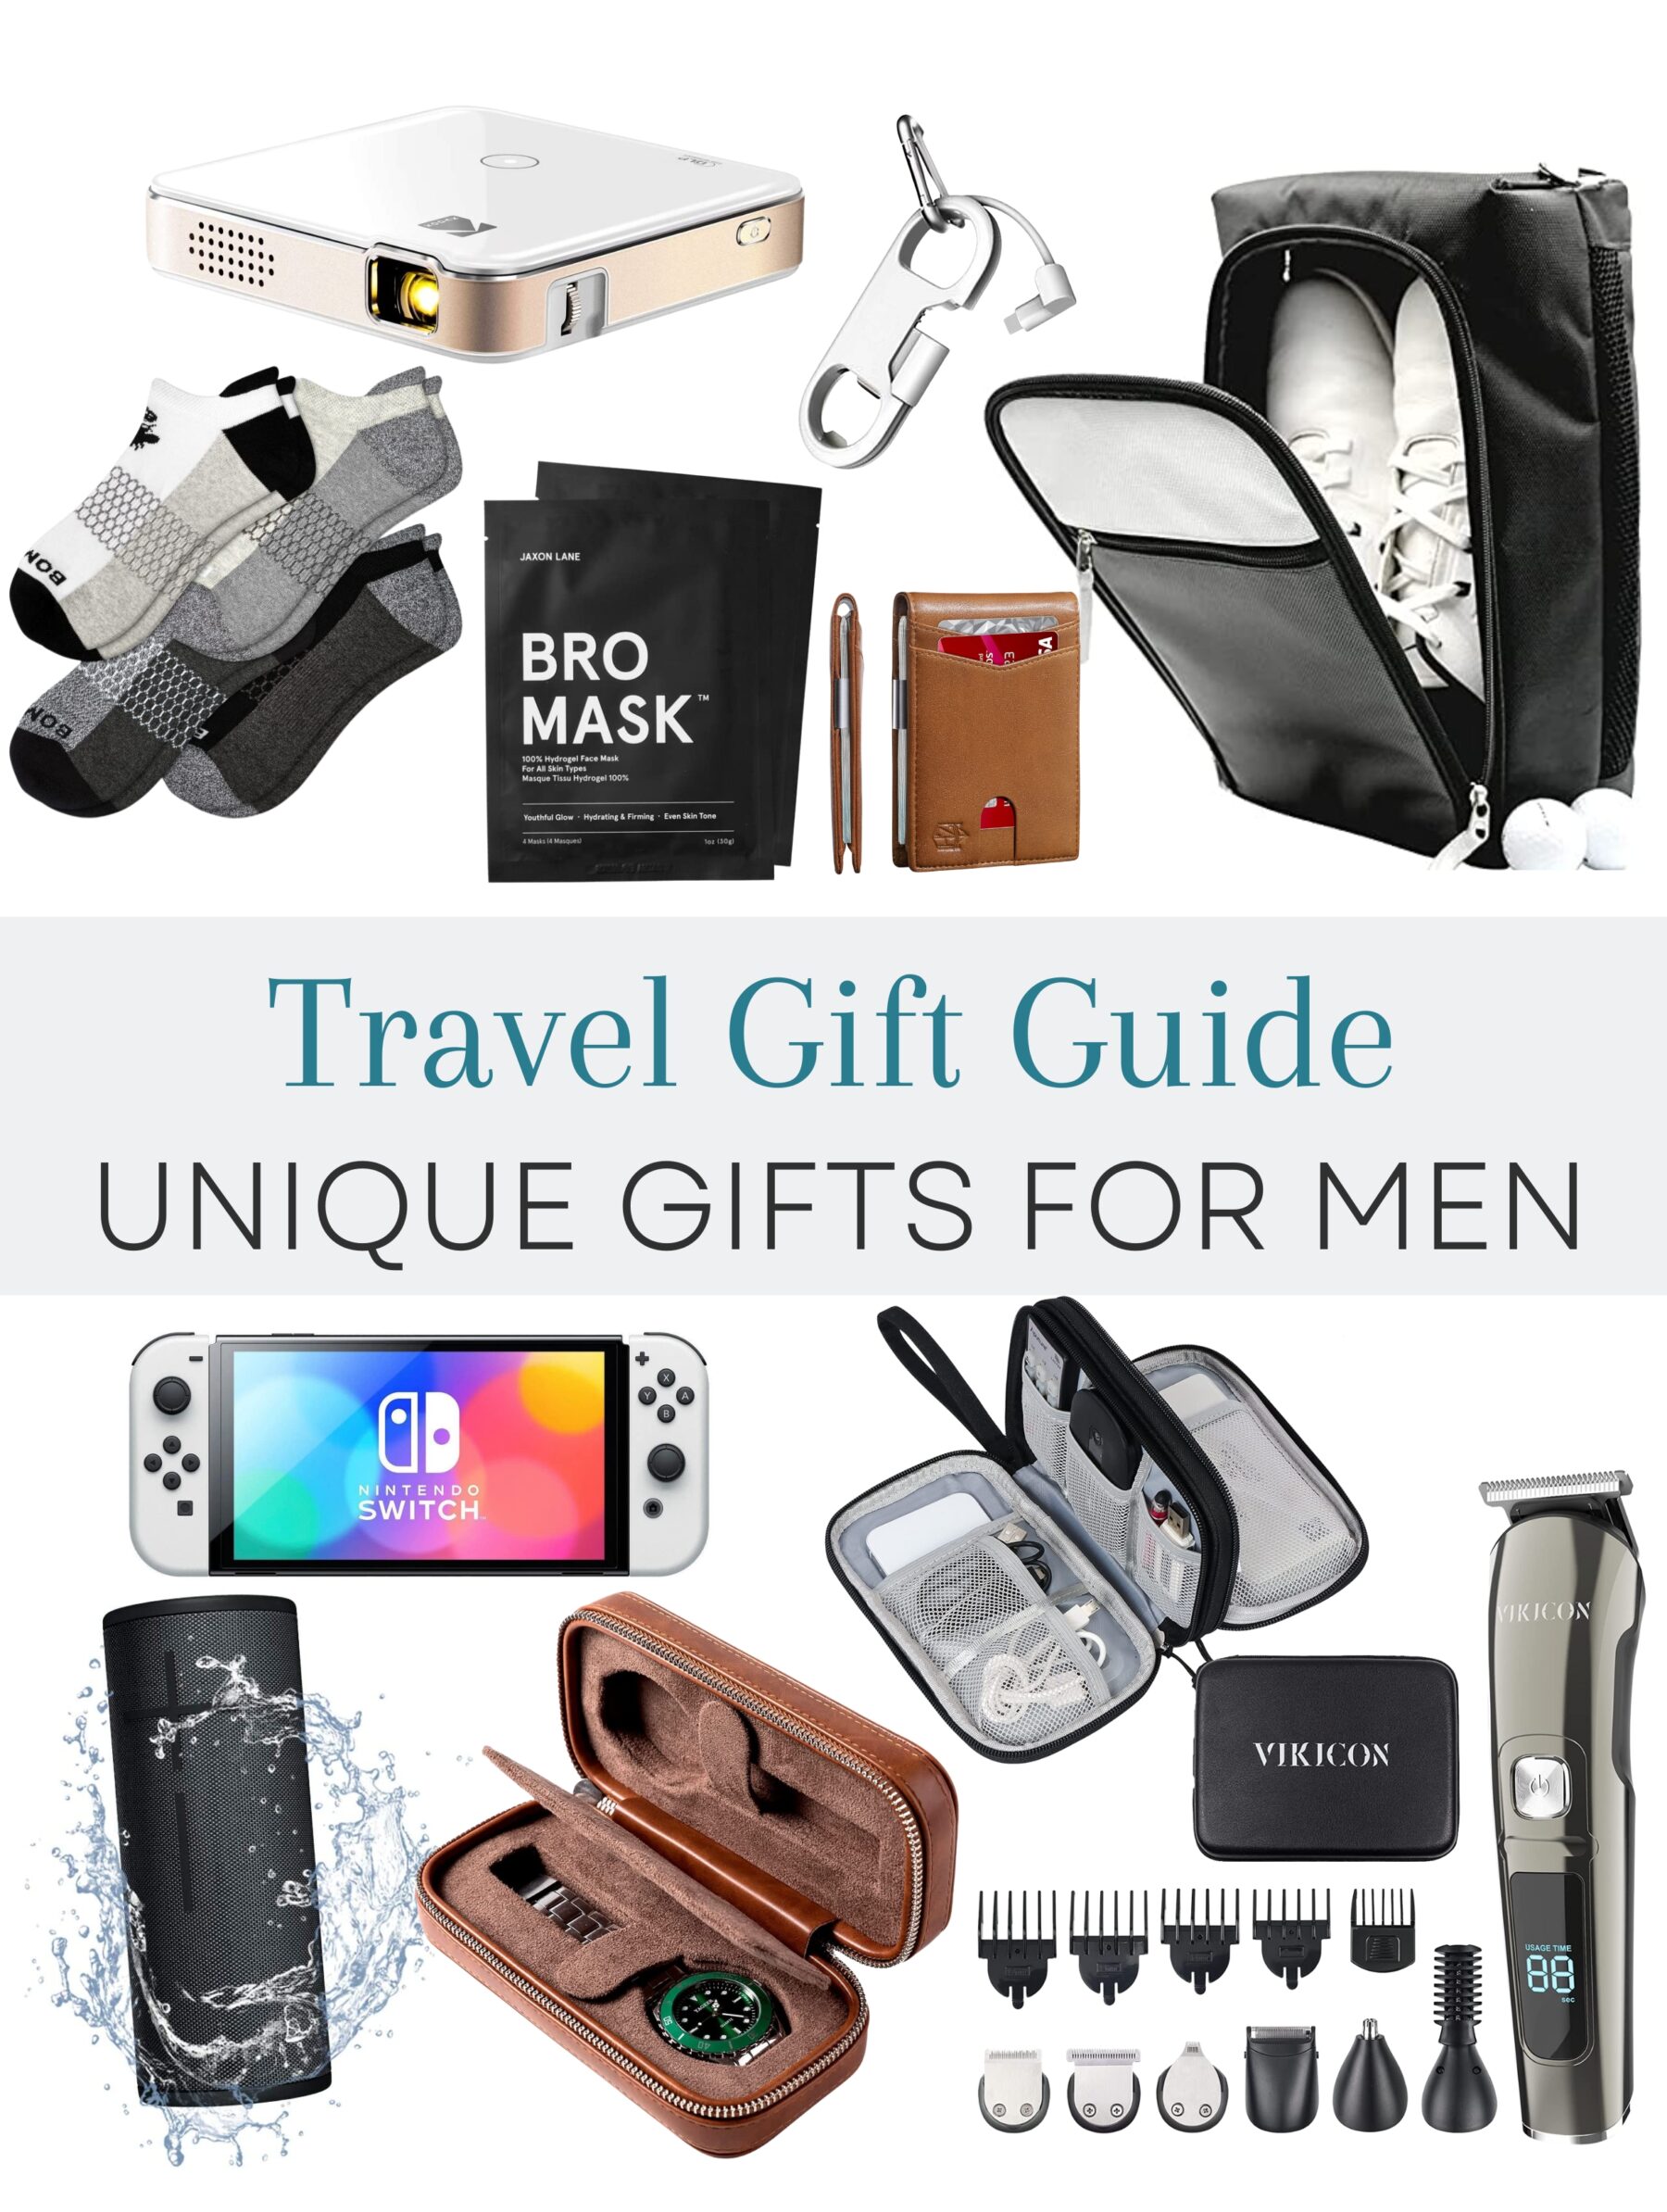 Travel Inspired Gifts for Men, Women, and Children (That They'll